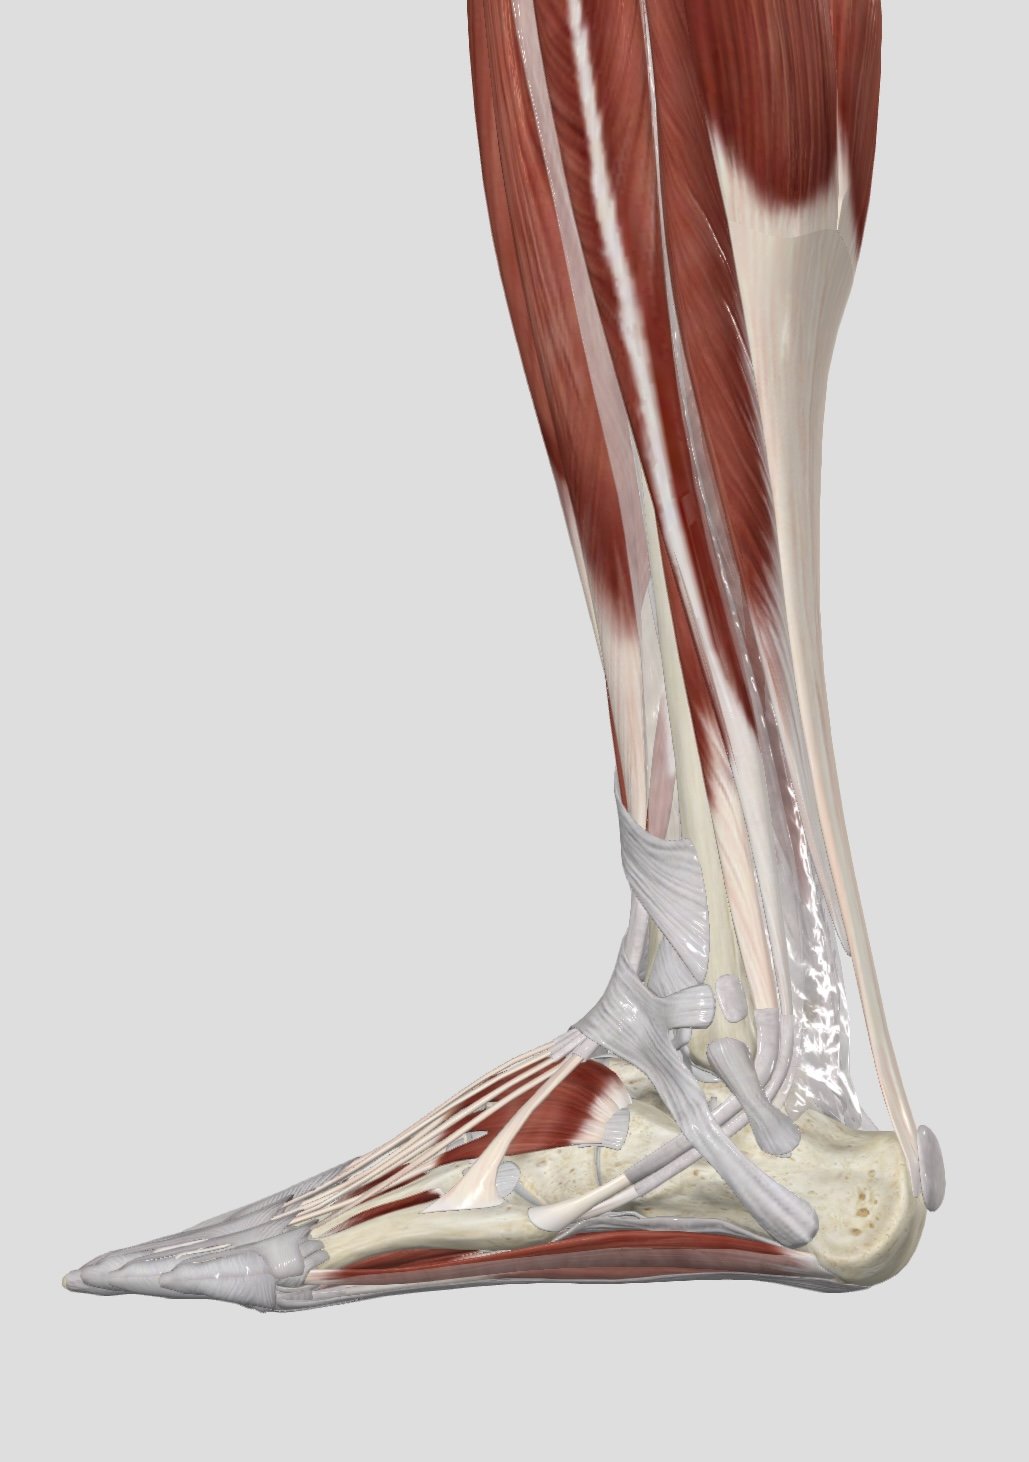 Muscles &amp; tendons of the inner foot